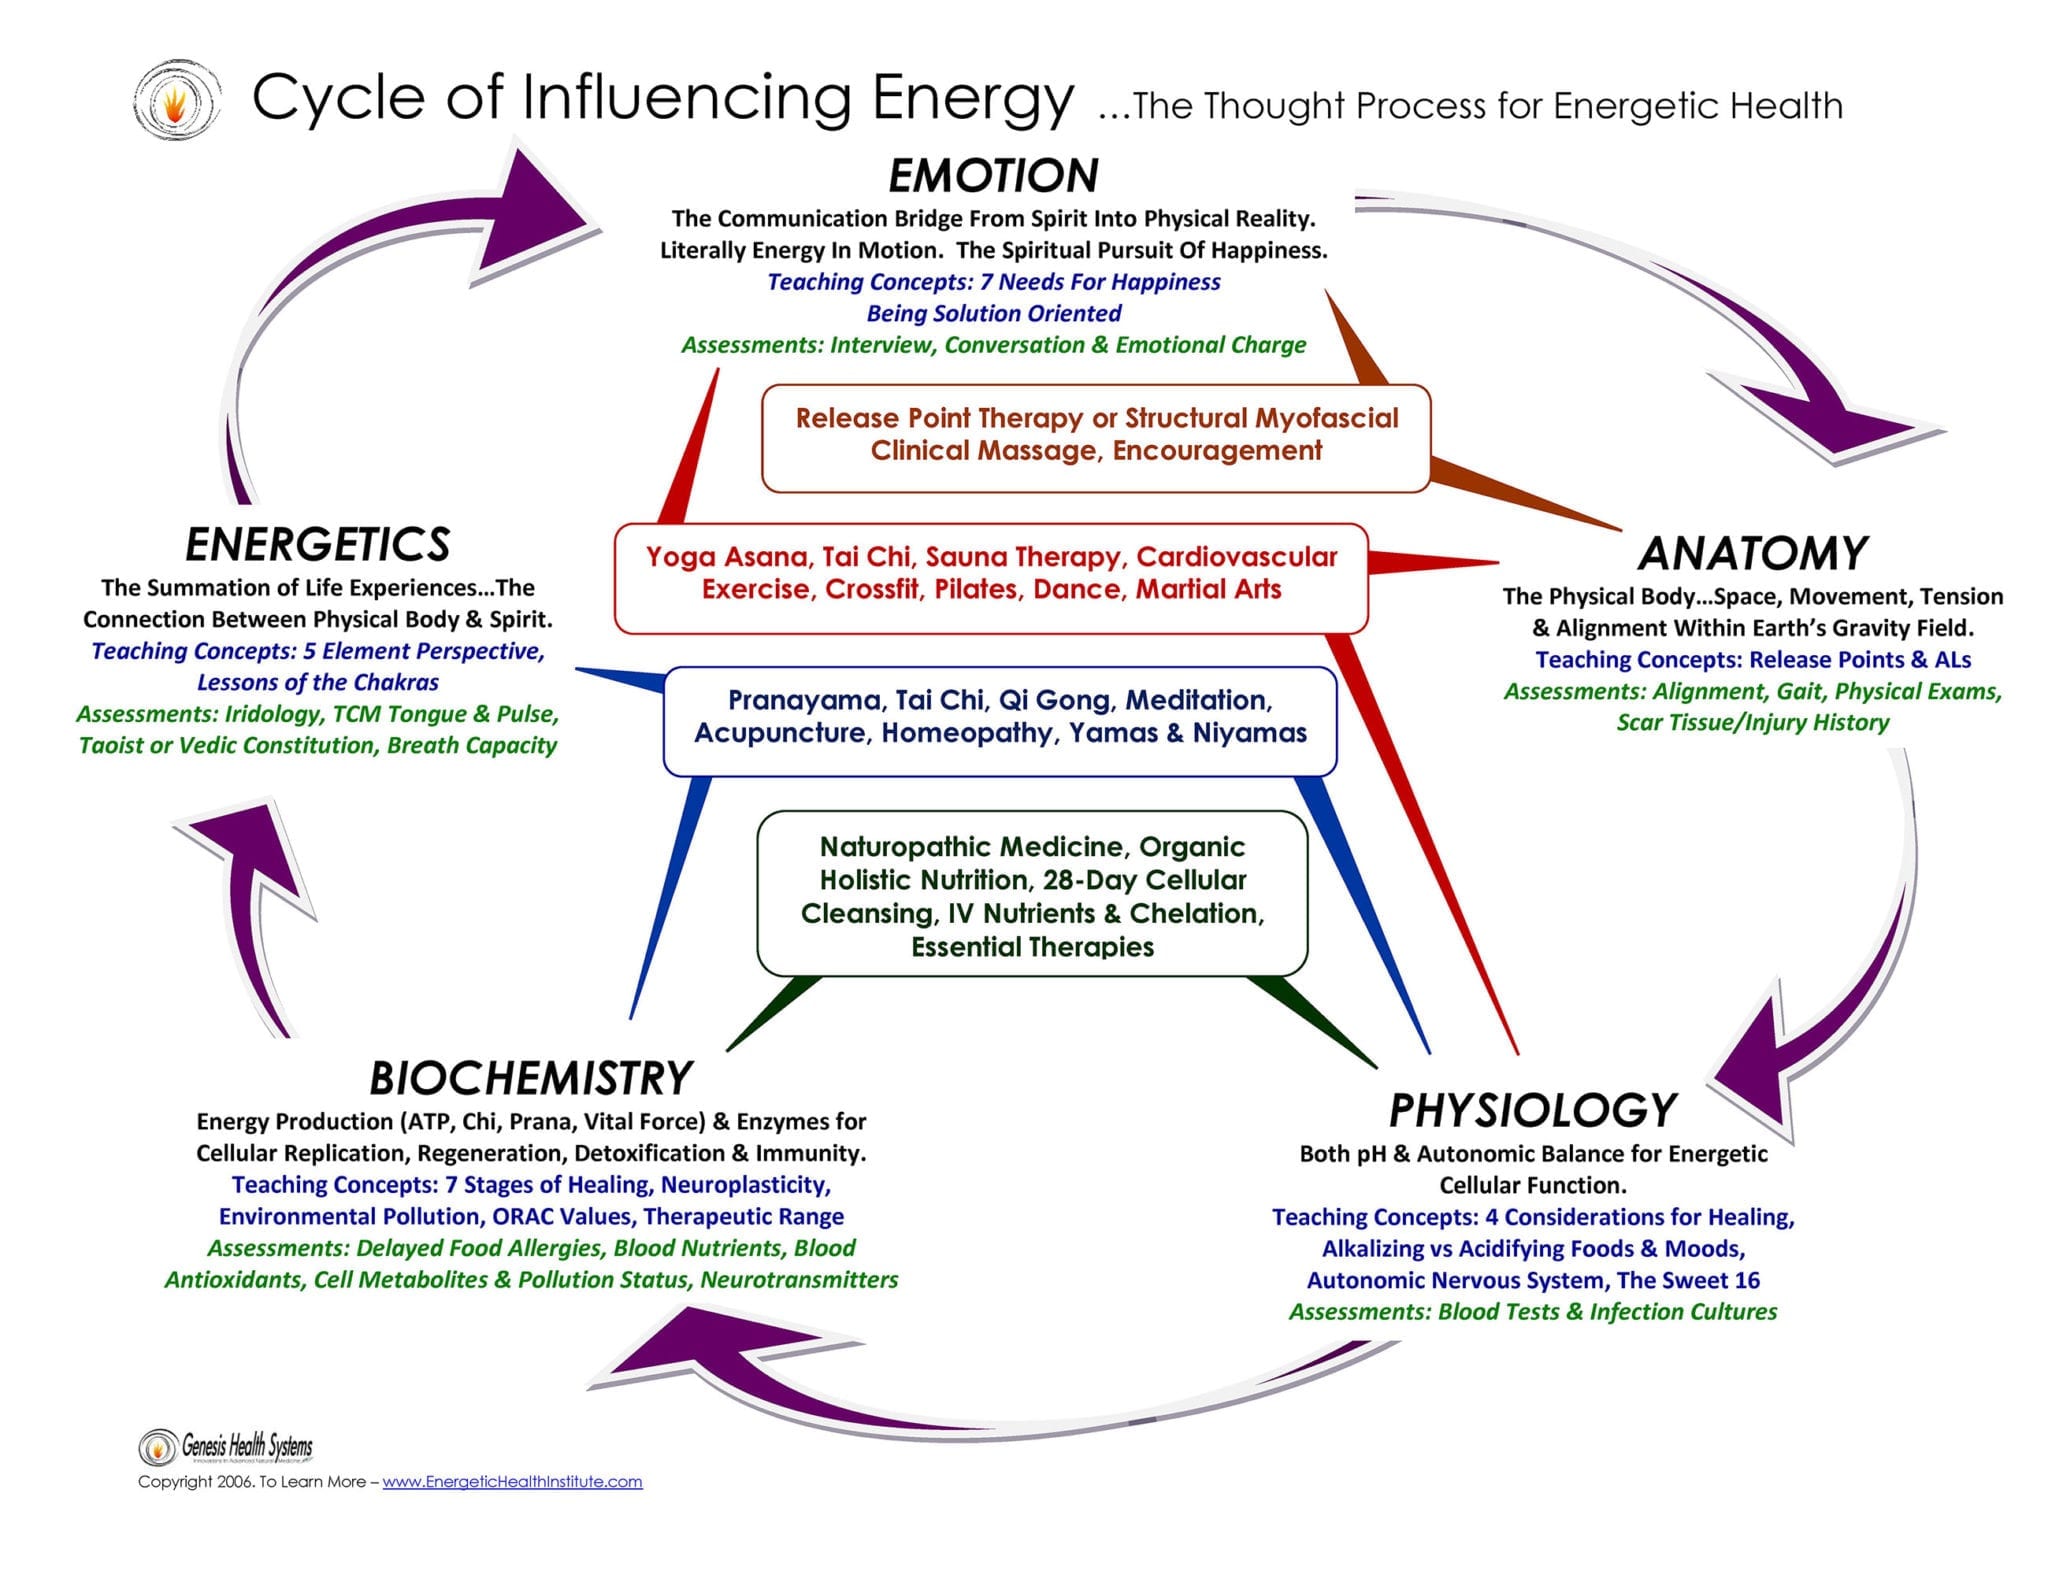 Cycle of Influencing Energy